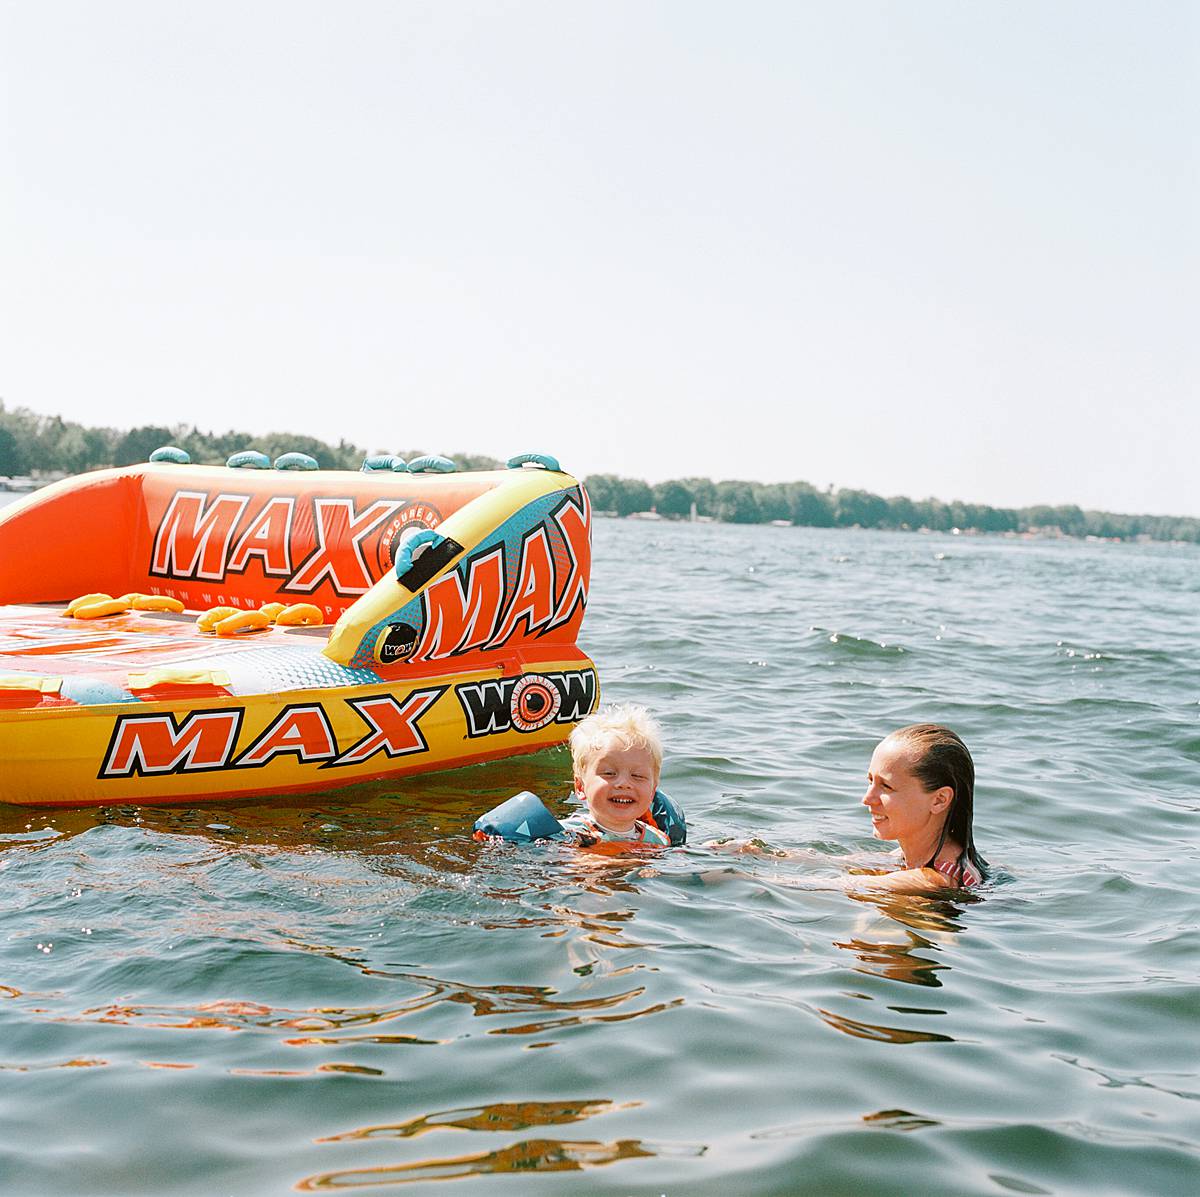 Kodak portra 800 film shot of family in water in northern michigan with giant boat tube